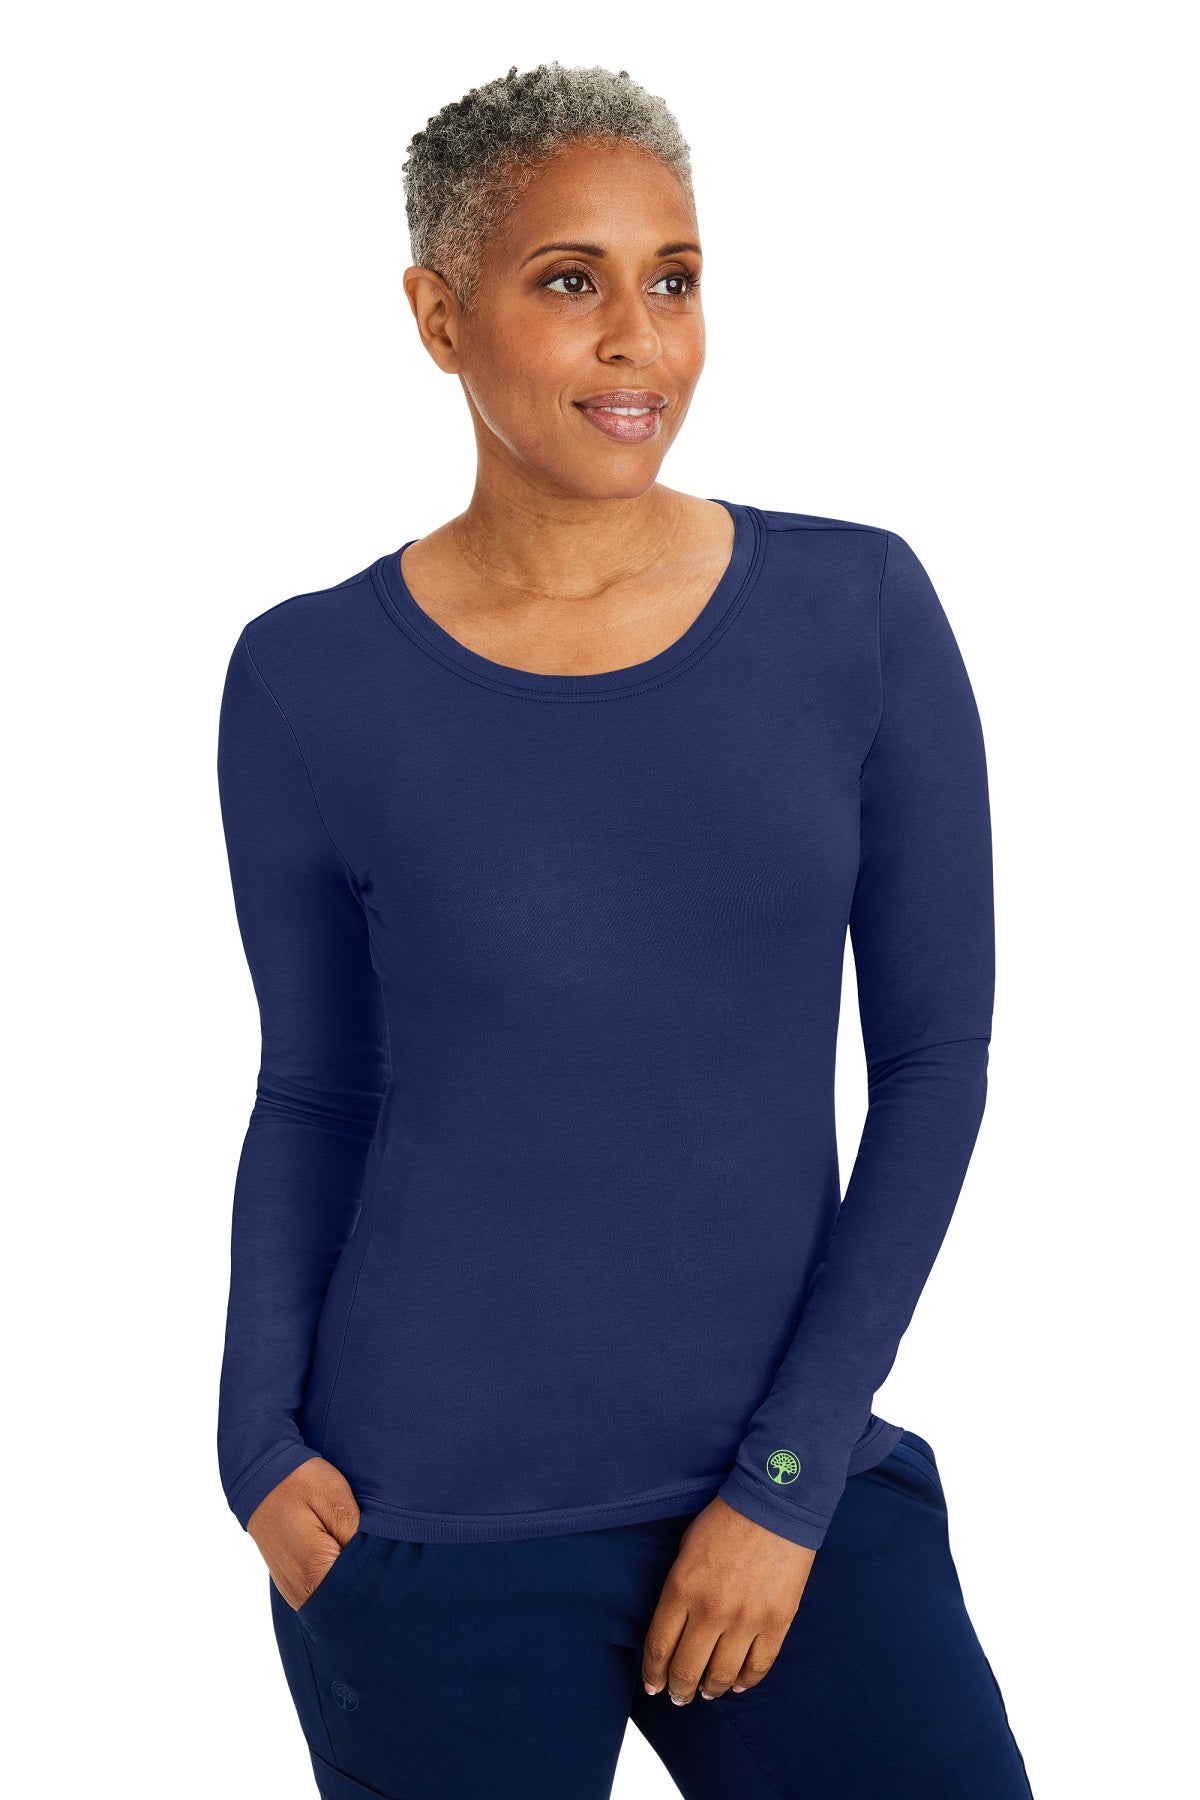 Healing Hands Purple Label Melissa Long Sleeve Tee in Navy at Parker's Clothing and Shoes.